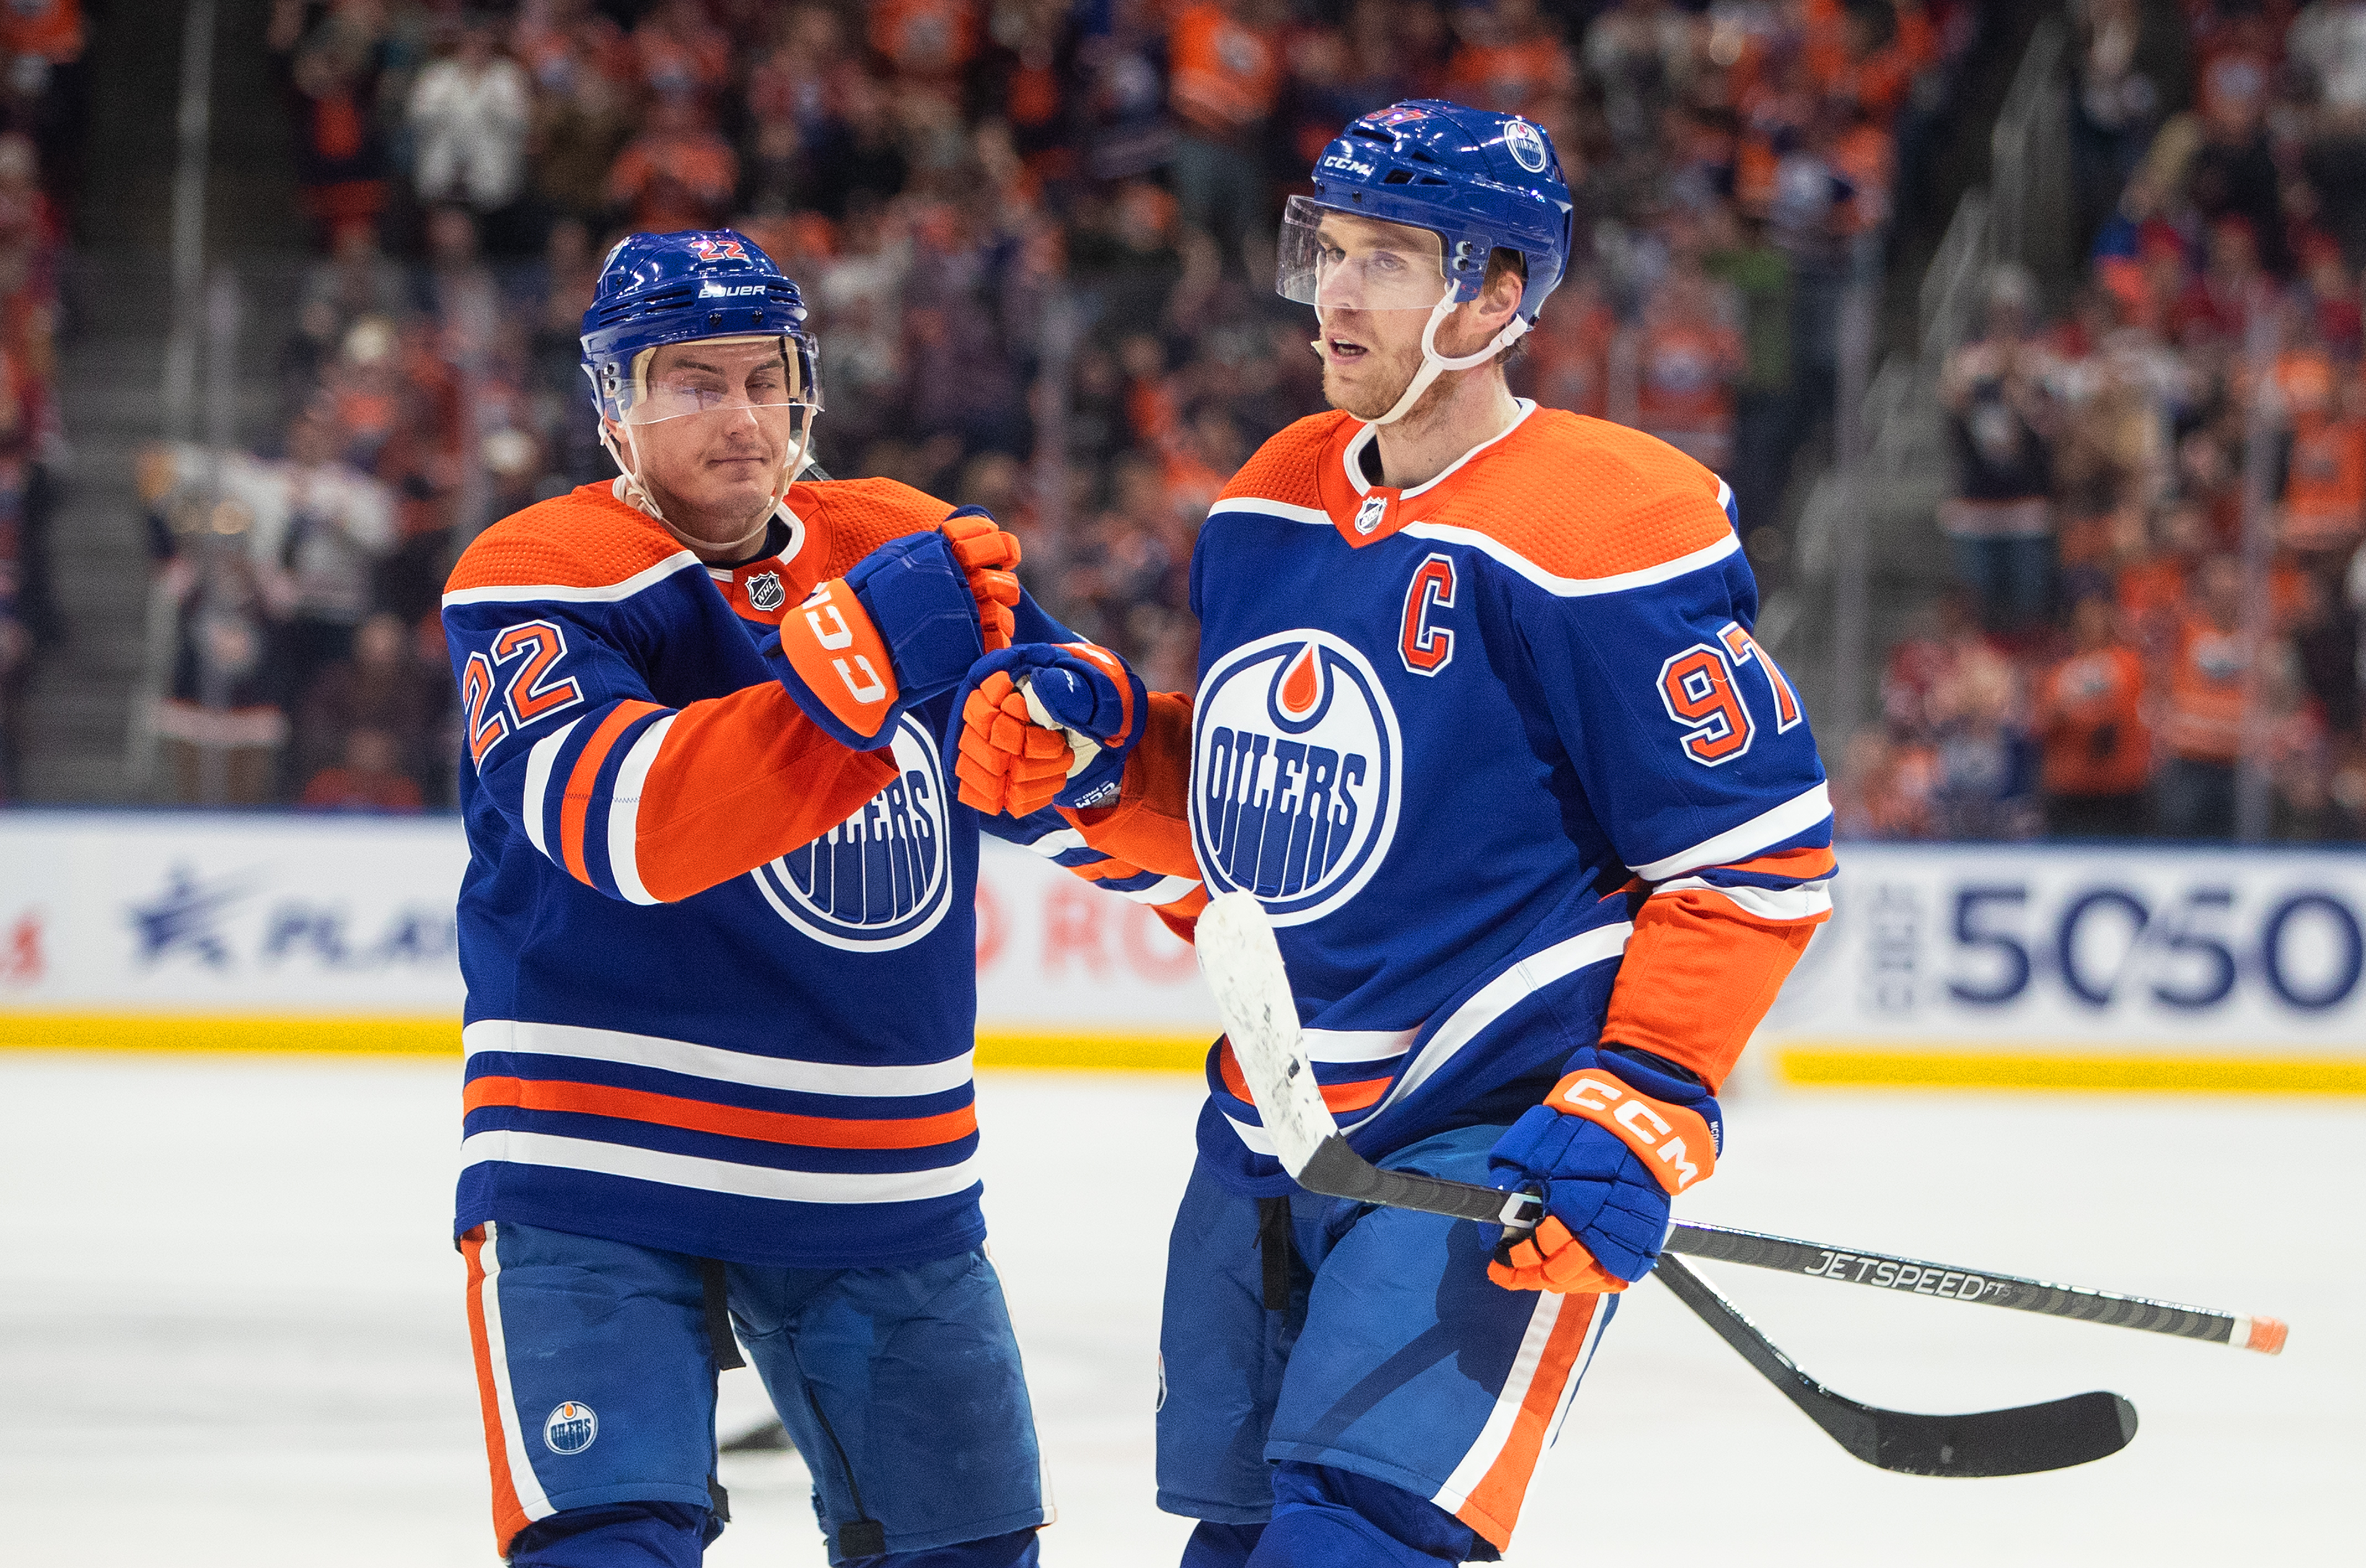 Edmonton Oilers power play coach Jay Woodcroft should listen to